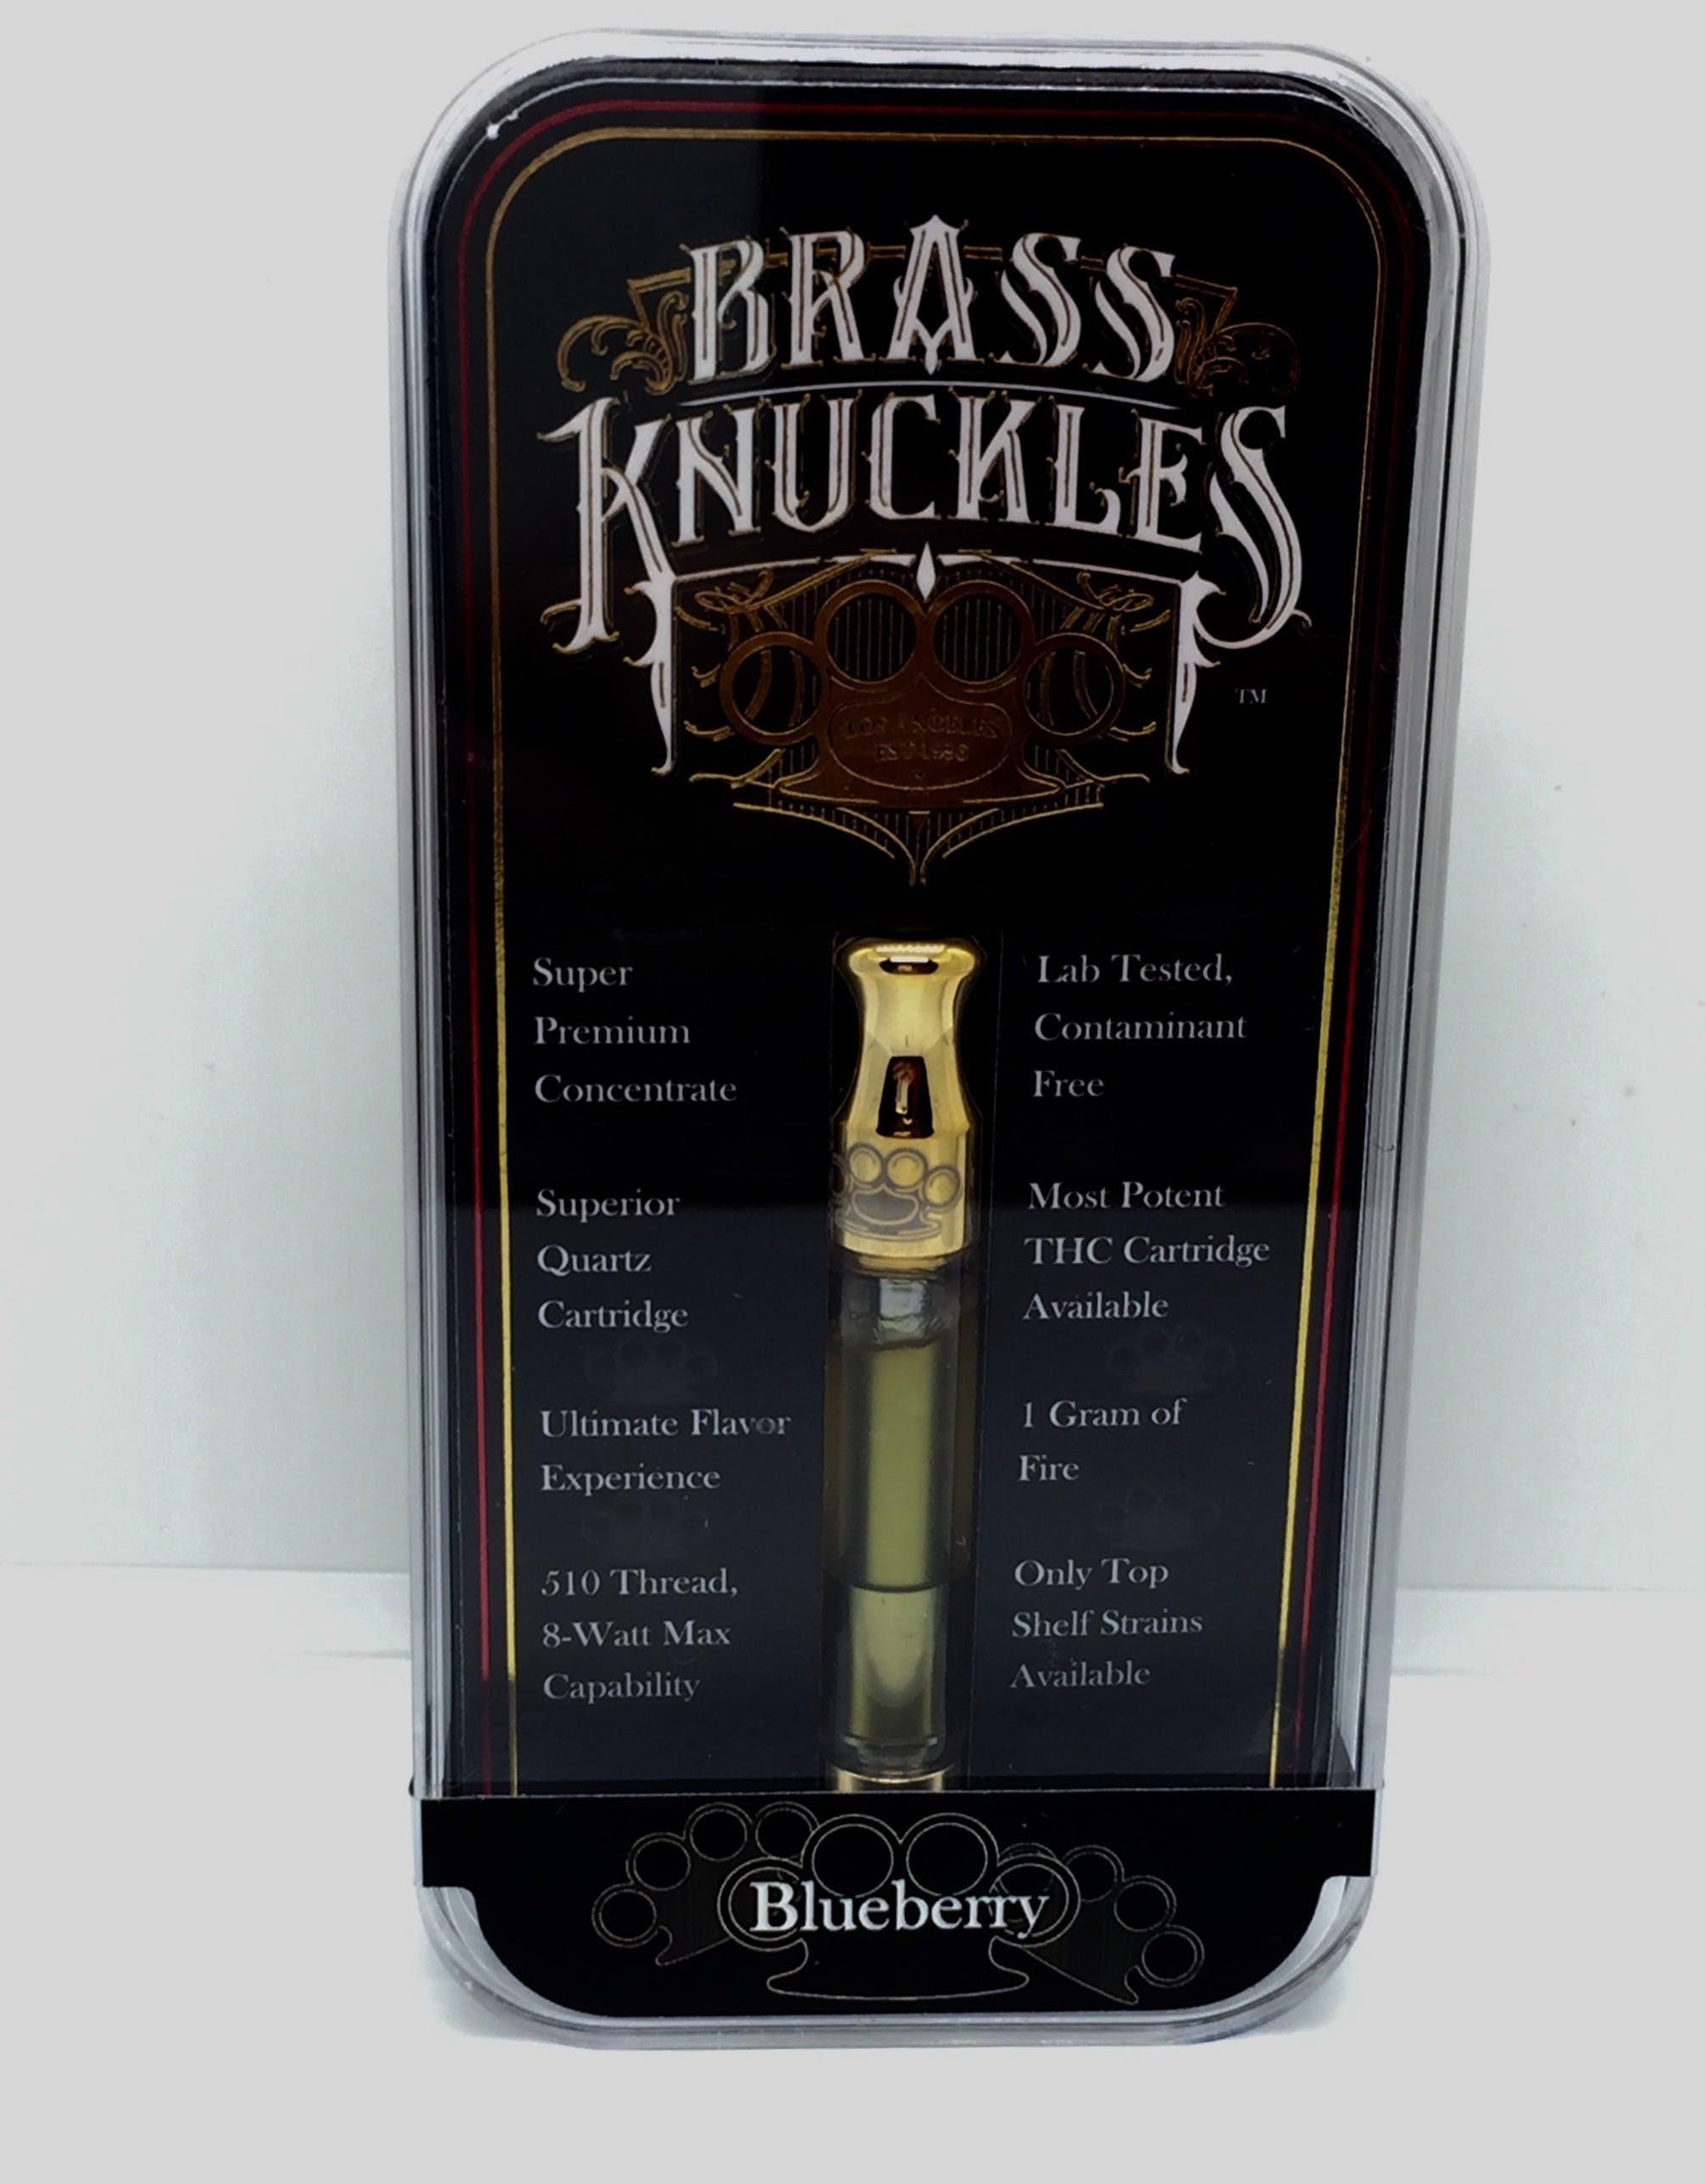 marijuana-dispensaries-holy-7th-heaven-in-los-angeles-brass-knuckles-blueberry